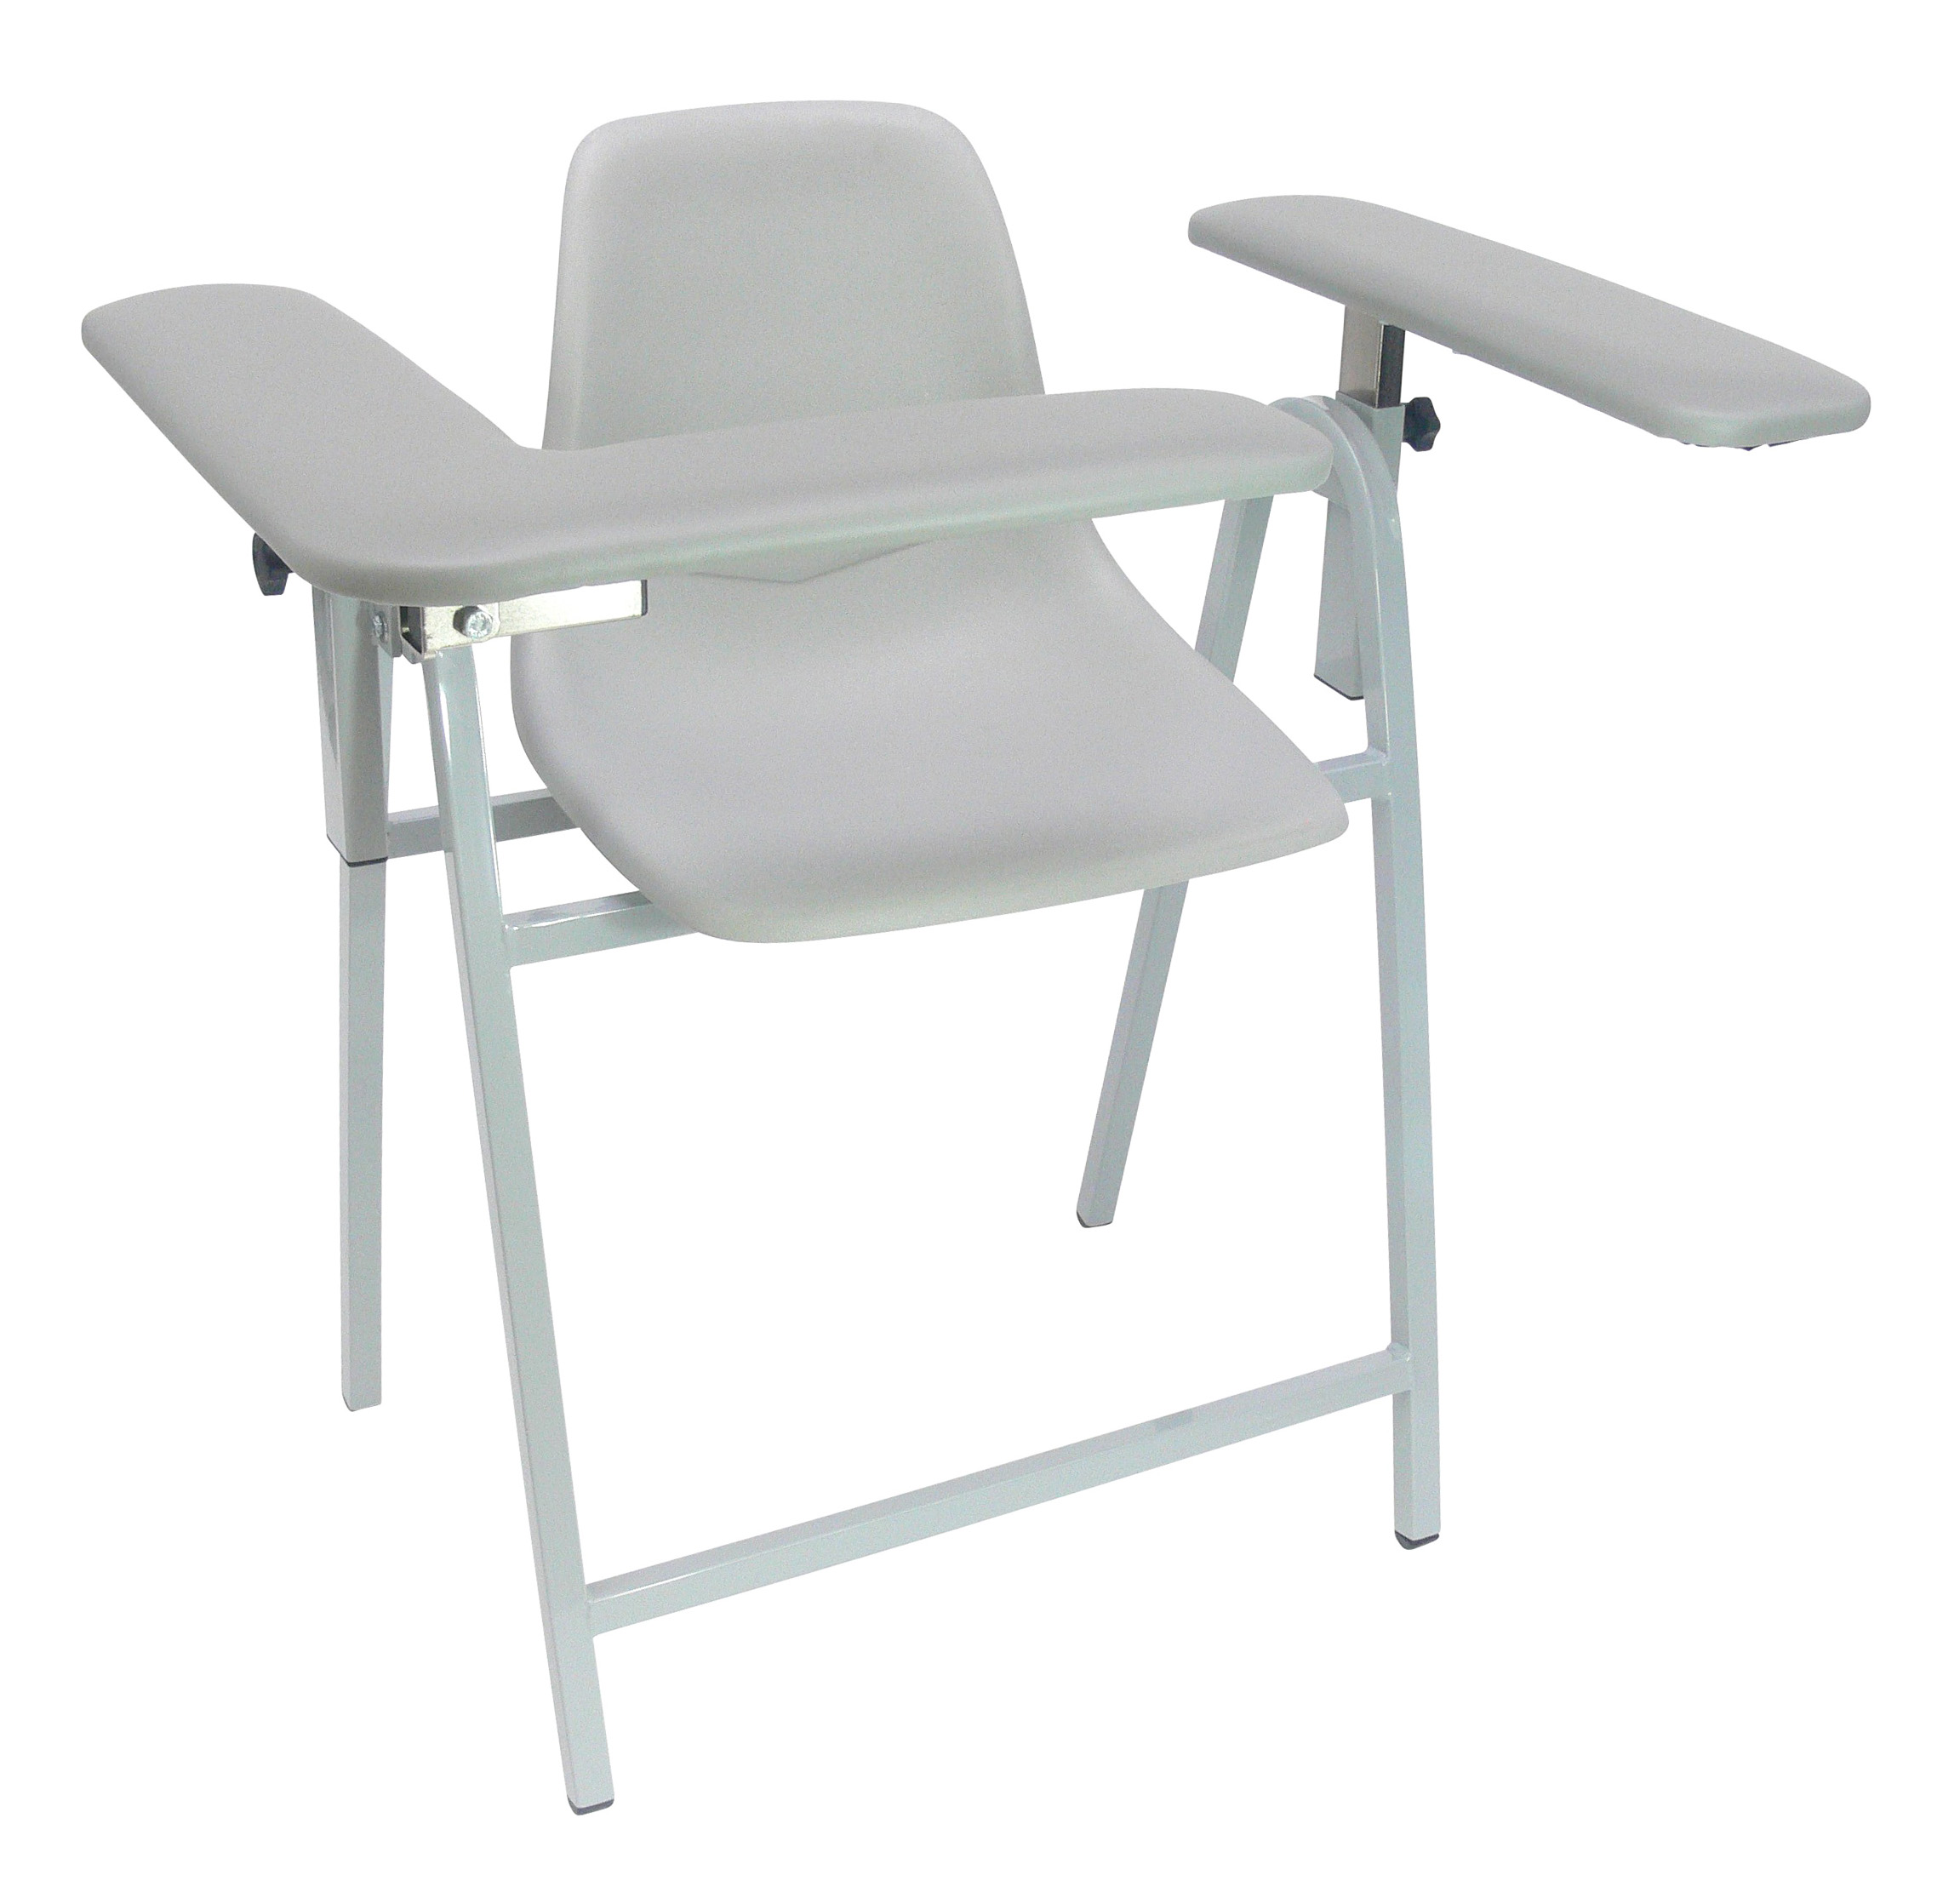 Blood Drawing (Phlebotomy) Chair, 24" Contoured Seat Height, Side Storage Tray, Dove Grey Upholstered Flip-Up Arms